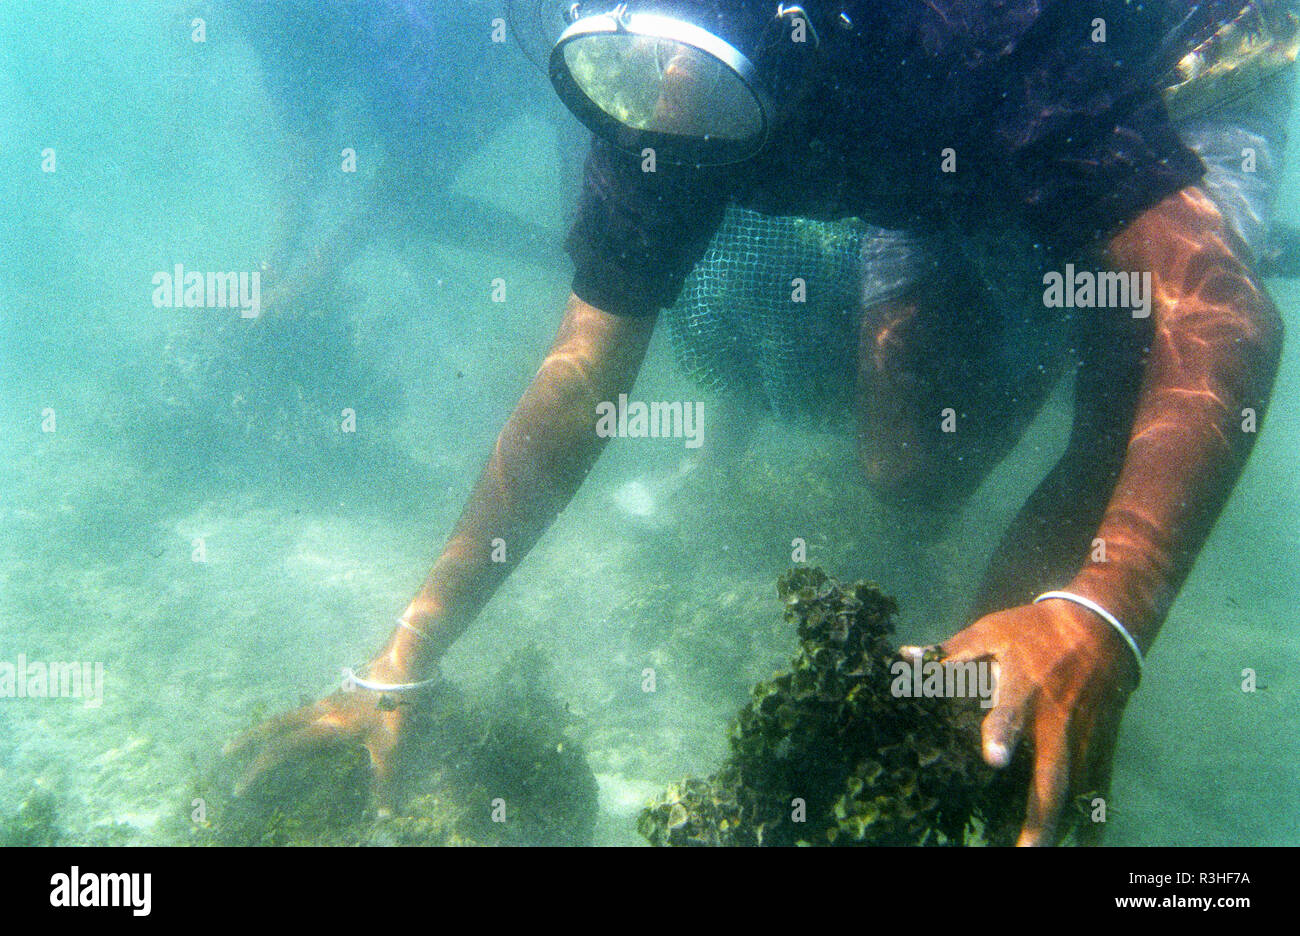 INDIA, Tamil Nadu, Gulf of Mannar, Ramnath, women of fishing village Valasai dive for seaweed for income generation , the red algae is used for processing of Agar-agar or Carrageenan as thickener for food industry, cosmetics etc., image was shot on 35mm color negative and has a strong film grain Stock Photo